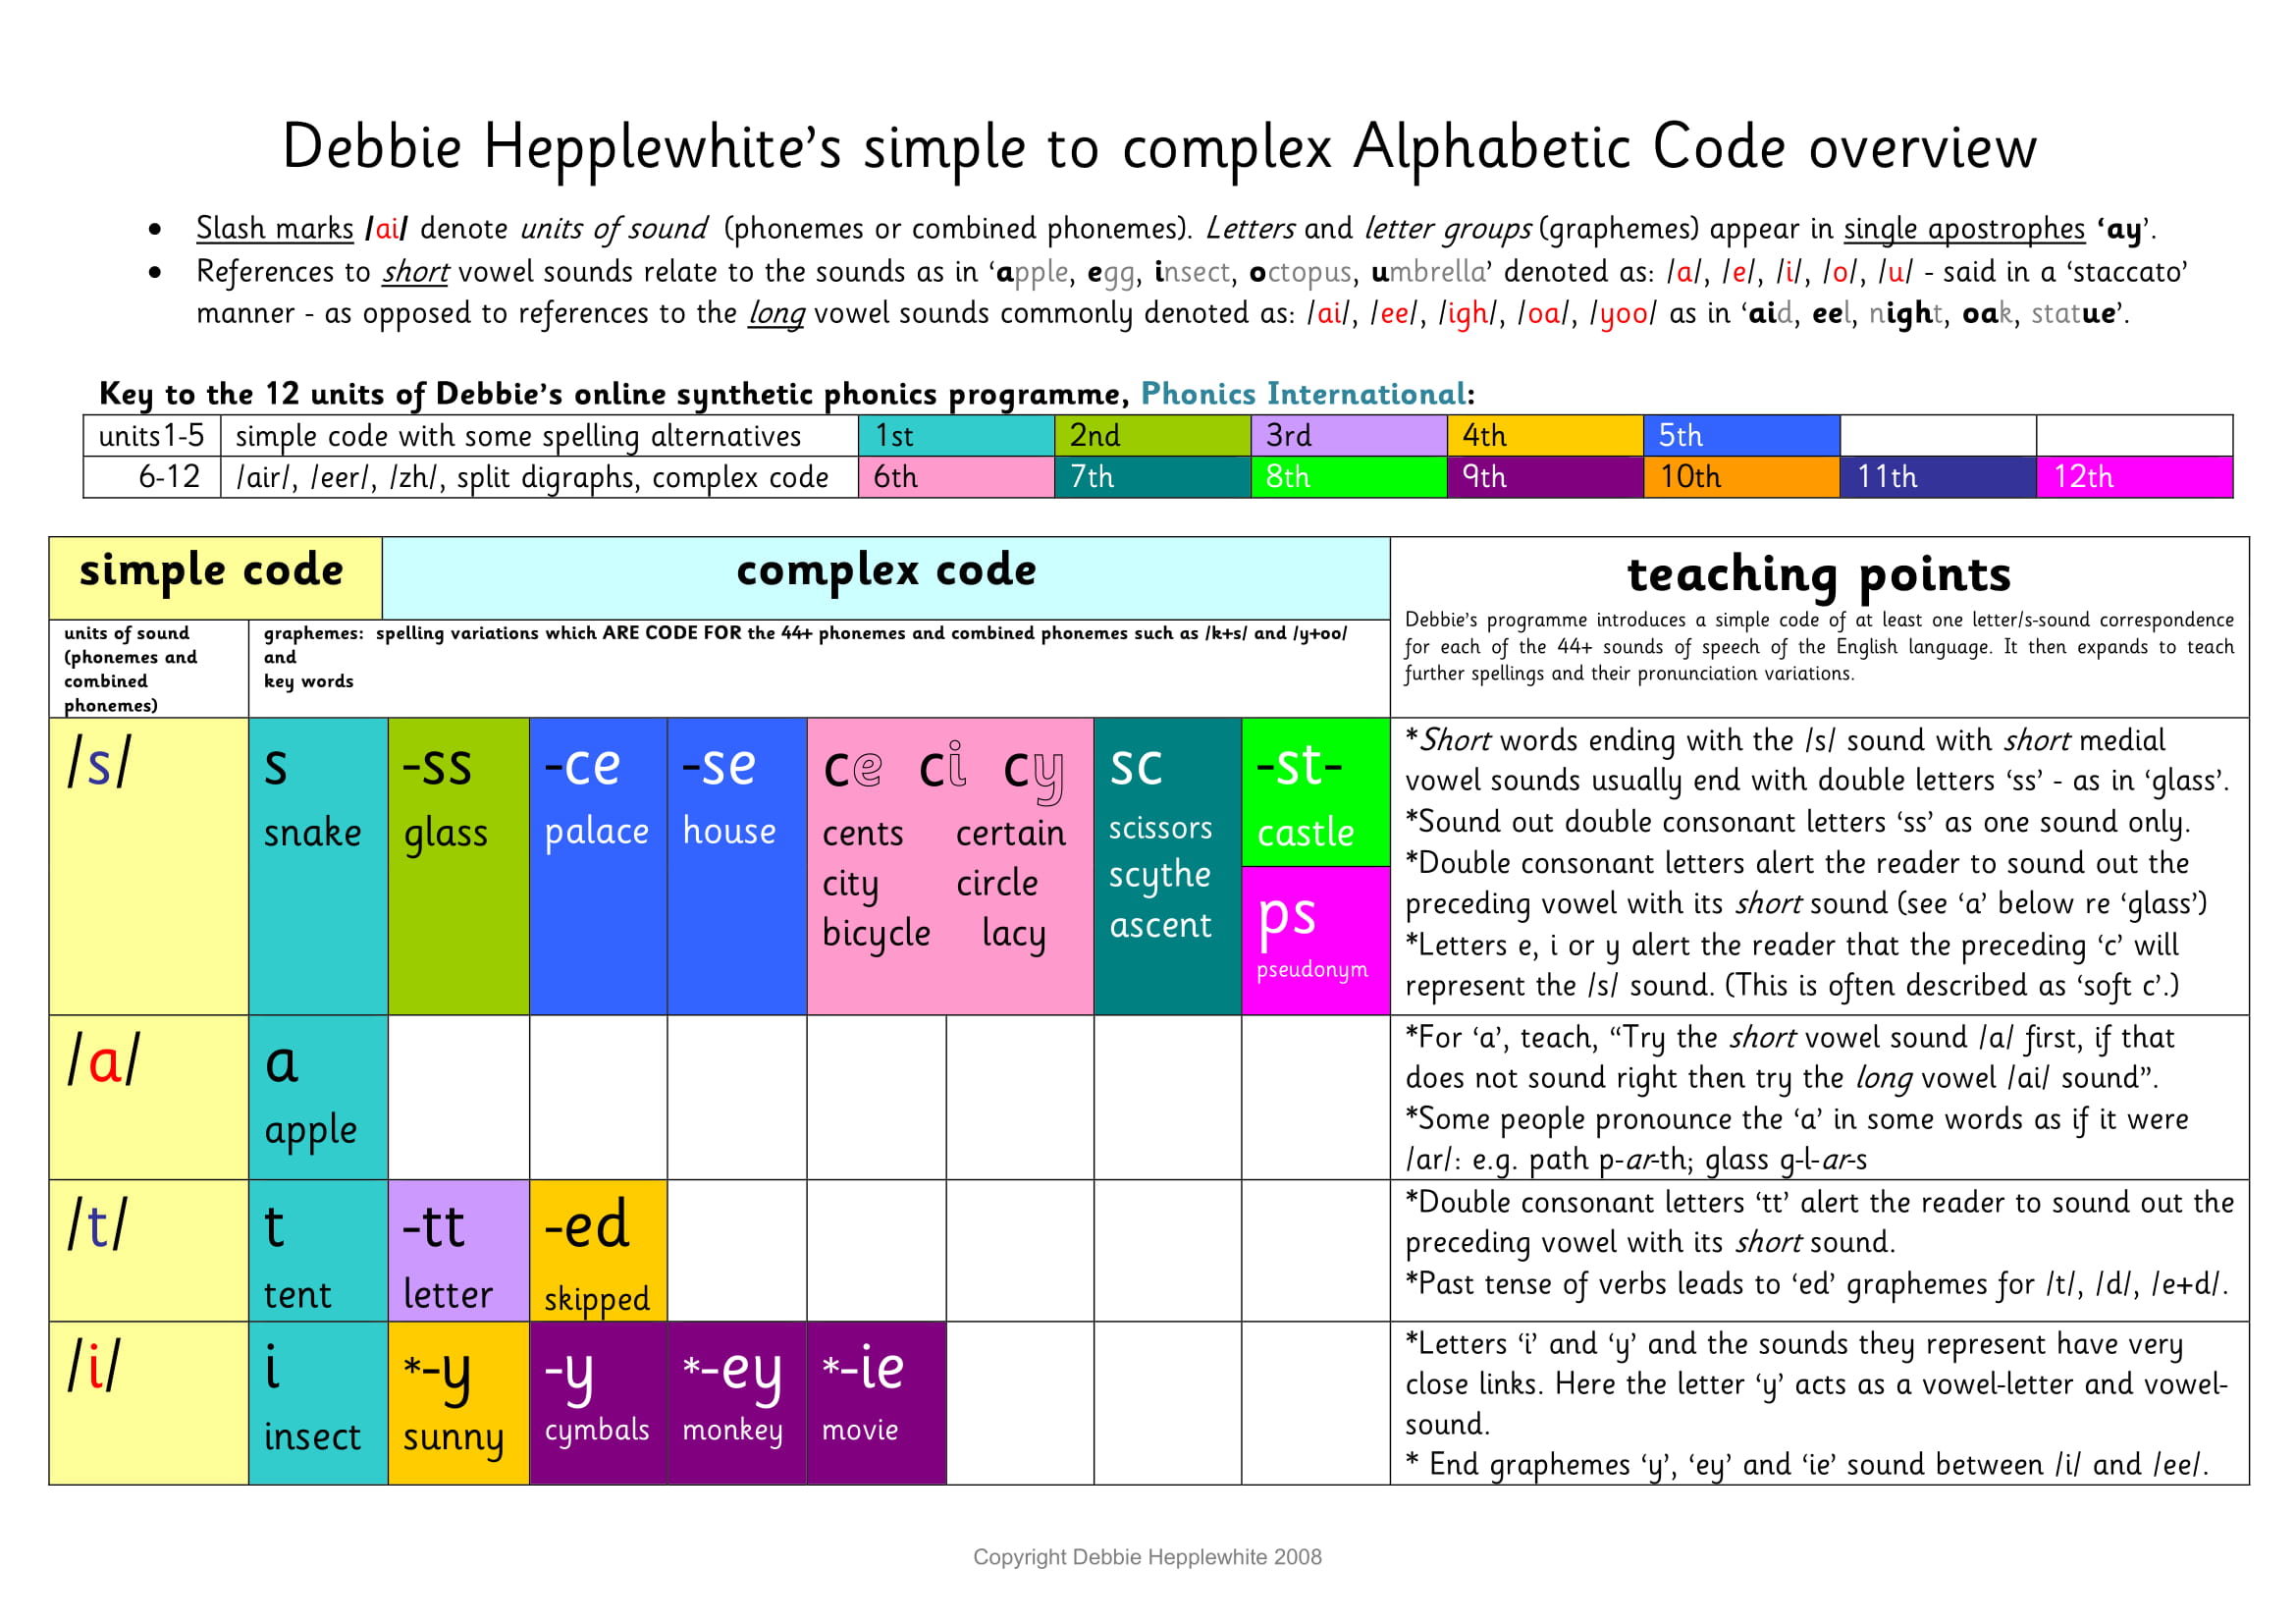 B1_DH-Alph-Code-overview-with-teaching-points-colour-1